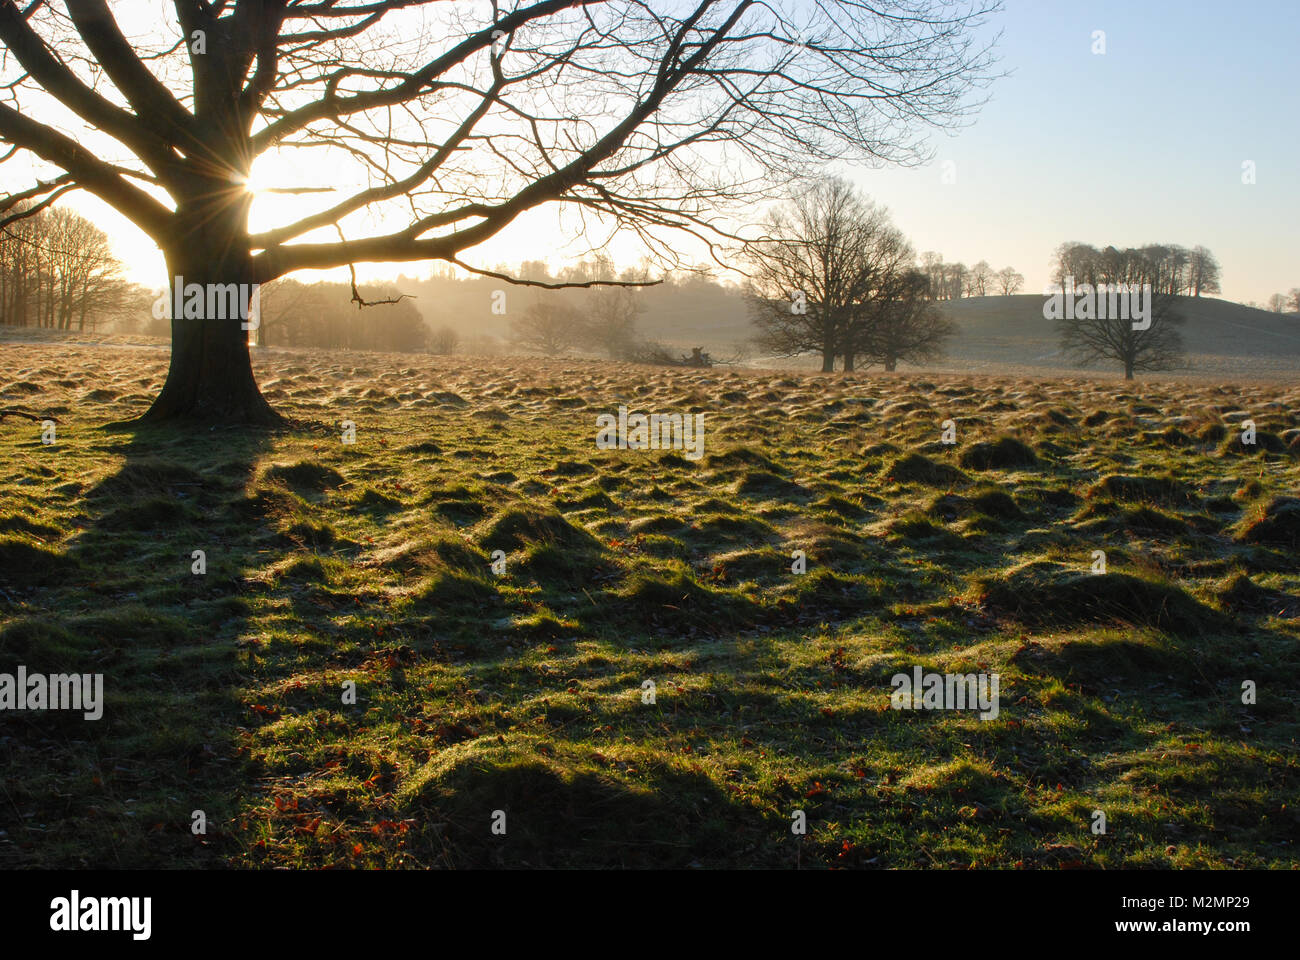 Early morning landscape at Petworth Park in West Sussex, UK. A beautiful sunny but frosty winter day in the English countryside. Stock Photo